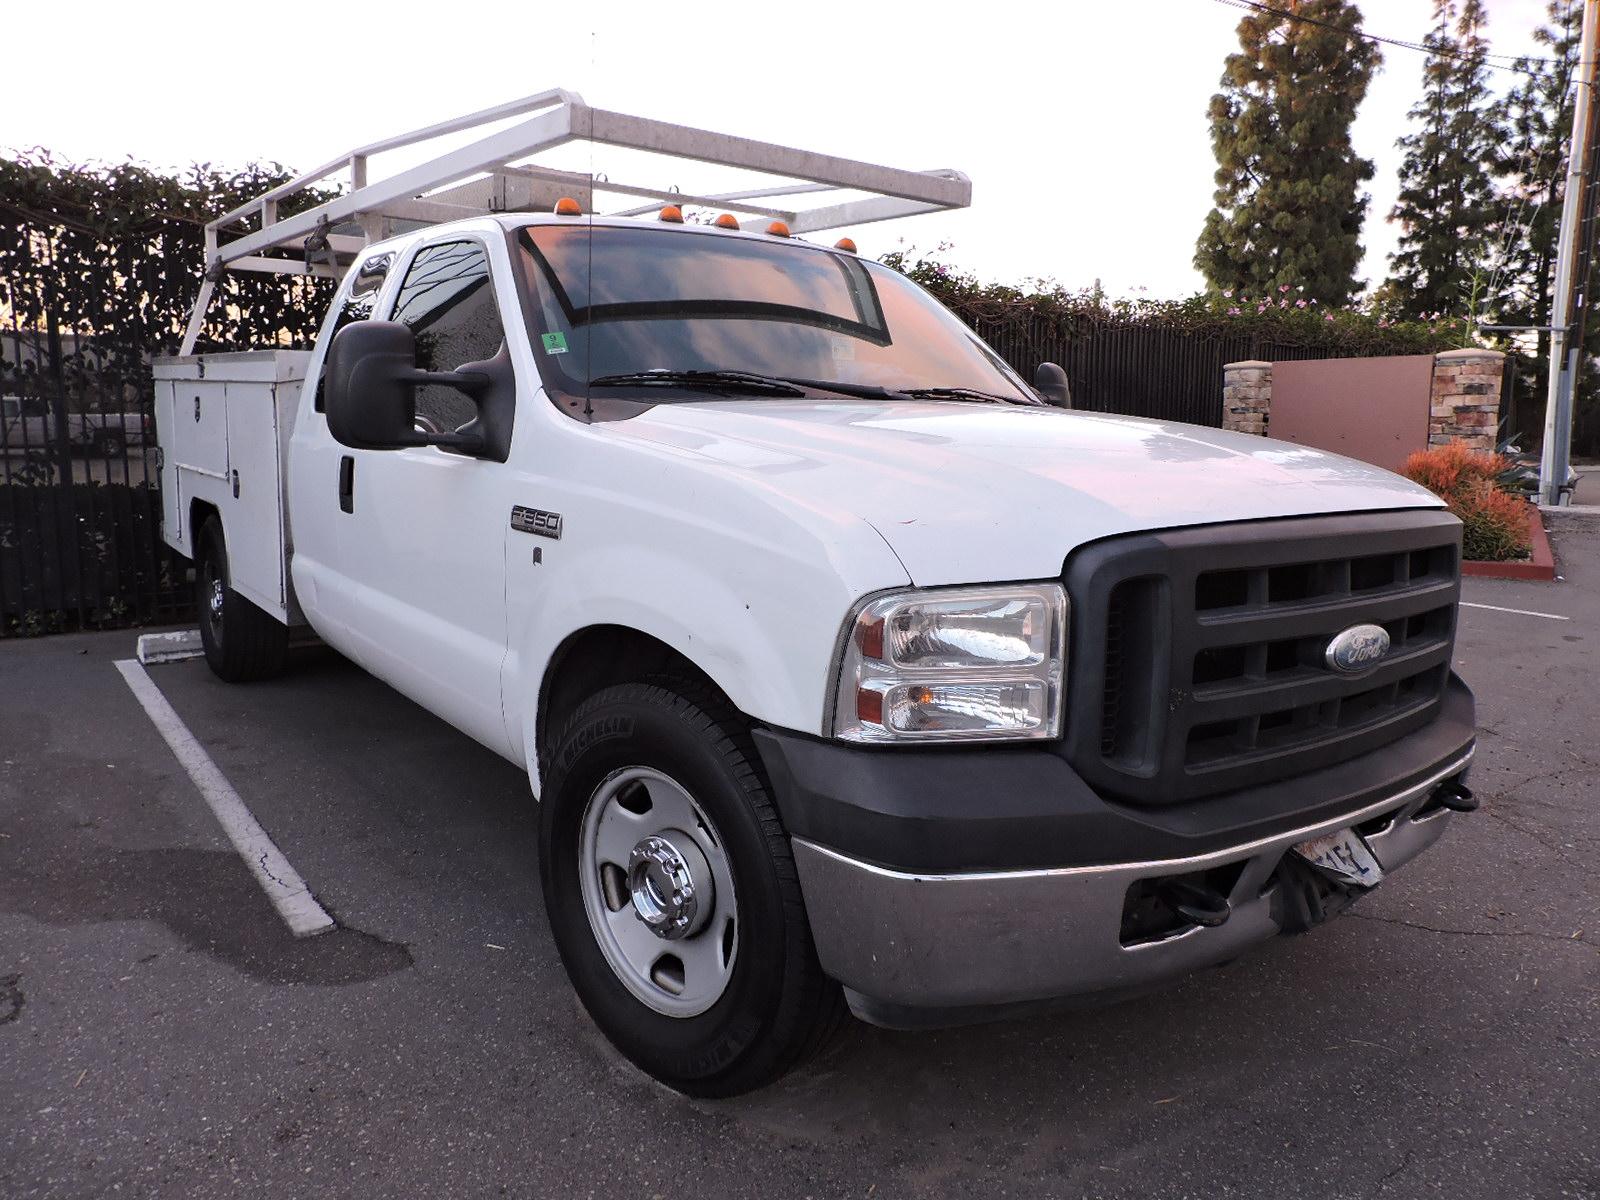 2007 Ford F350 Super-Cab 2WD Open Utility with Approx. 245,000 Miles